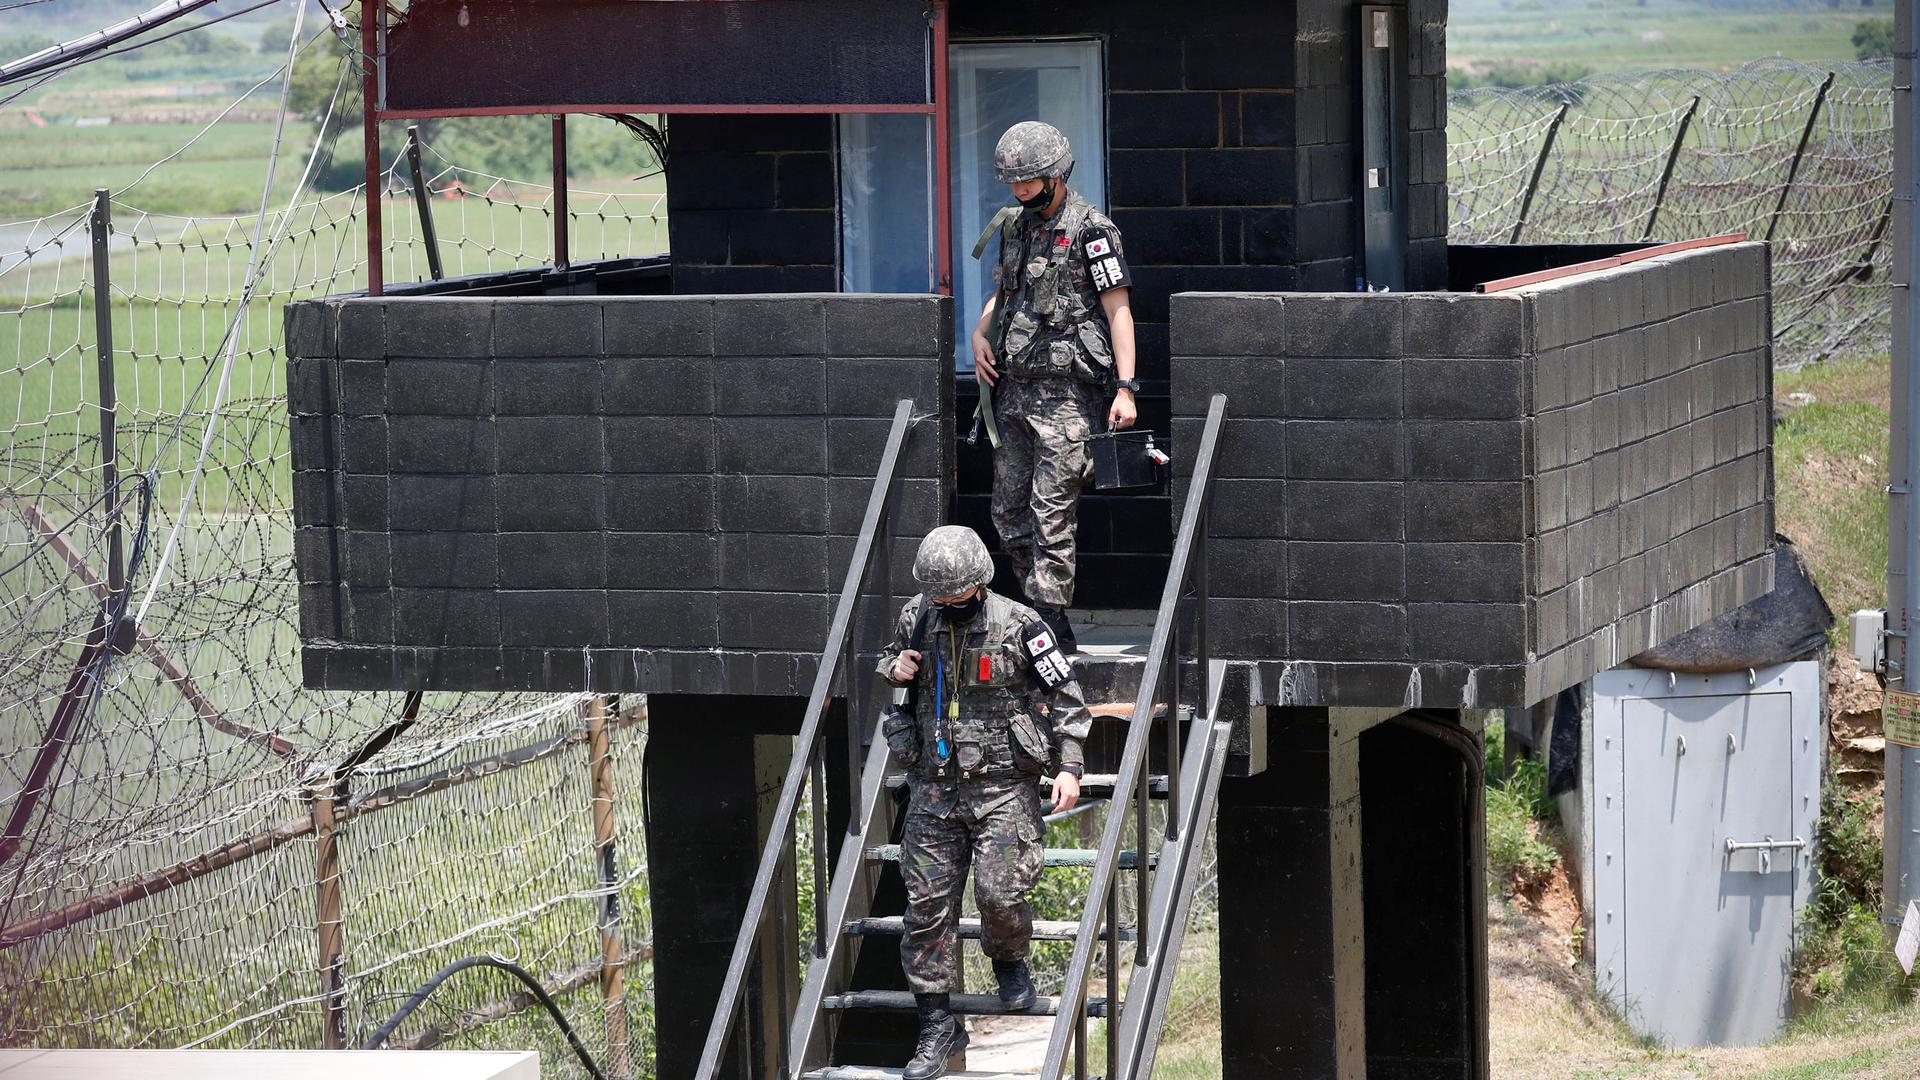 Two soldiers dressed in military fatigues and carrying weapons are shown decending a staircase from a guard tower.